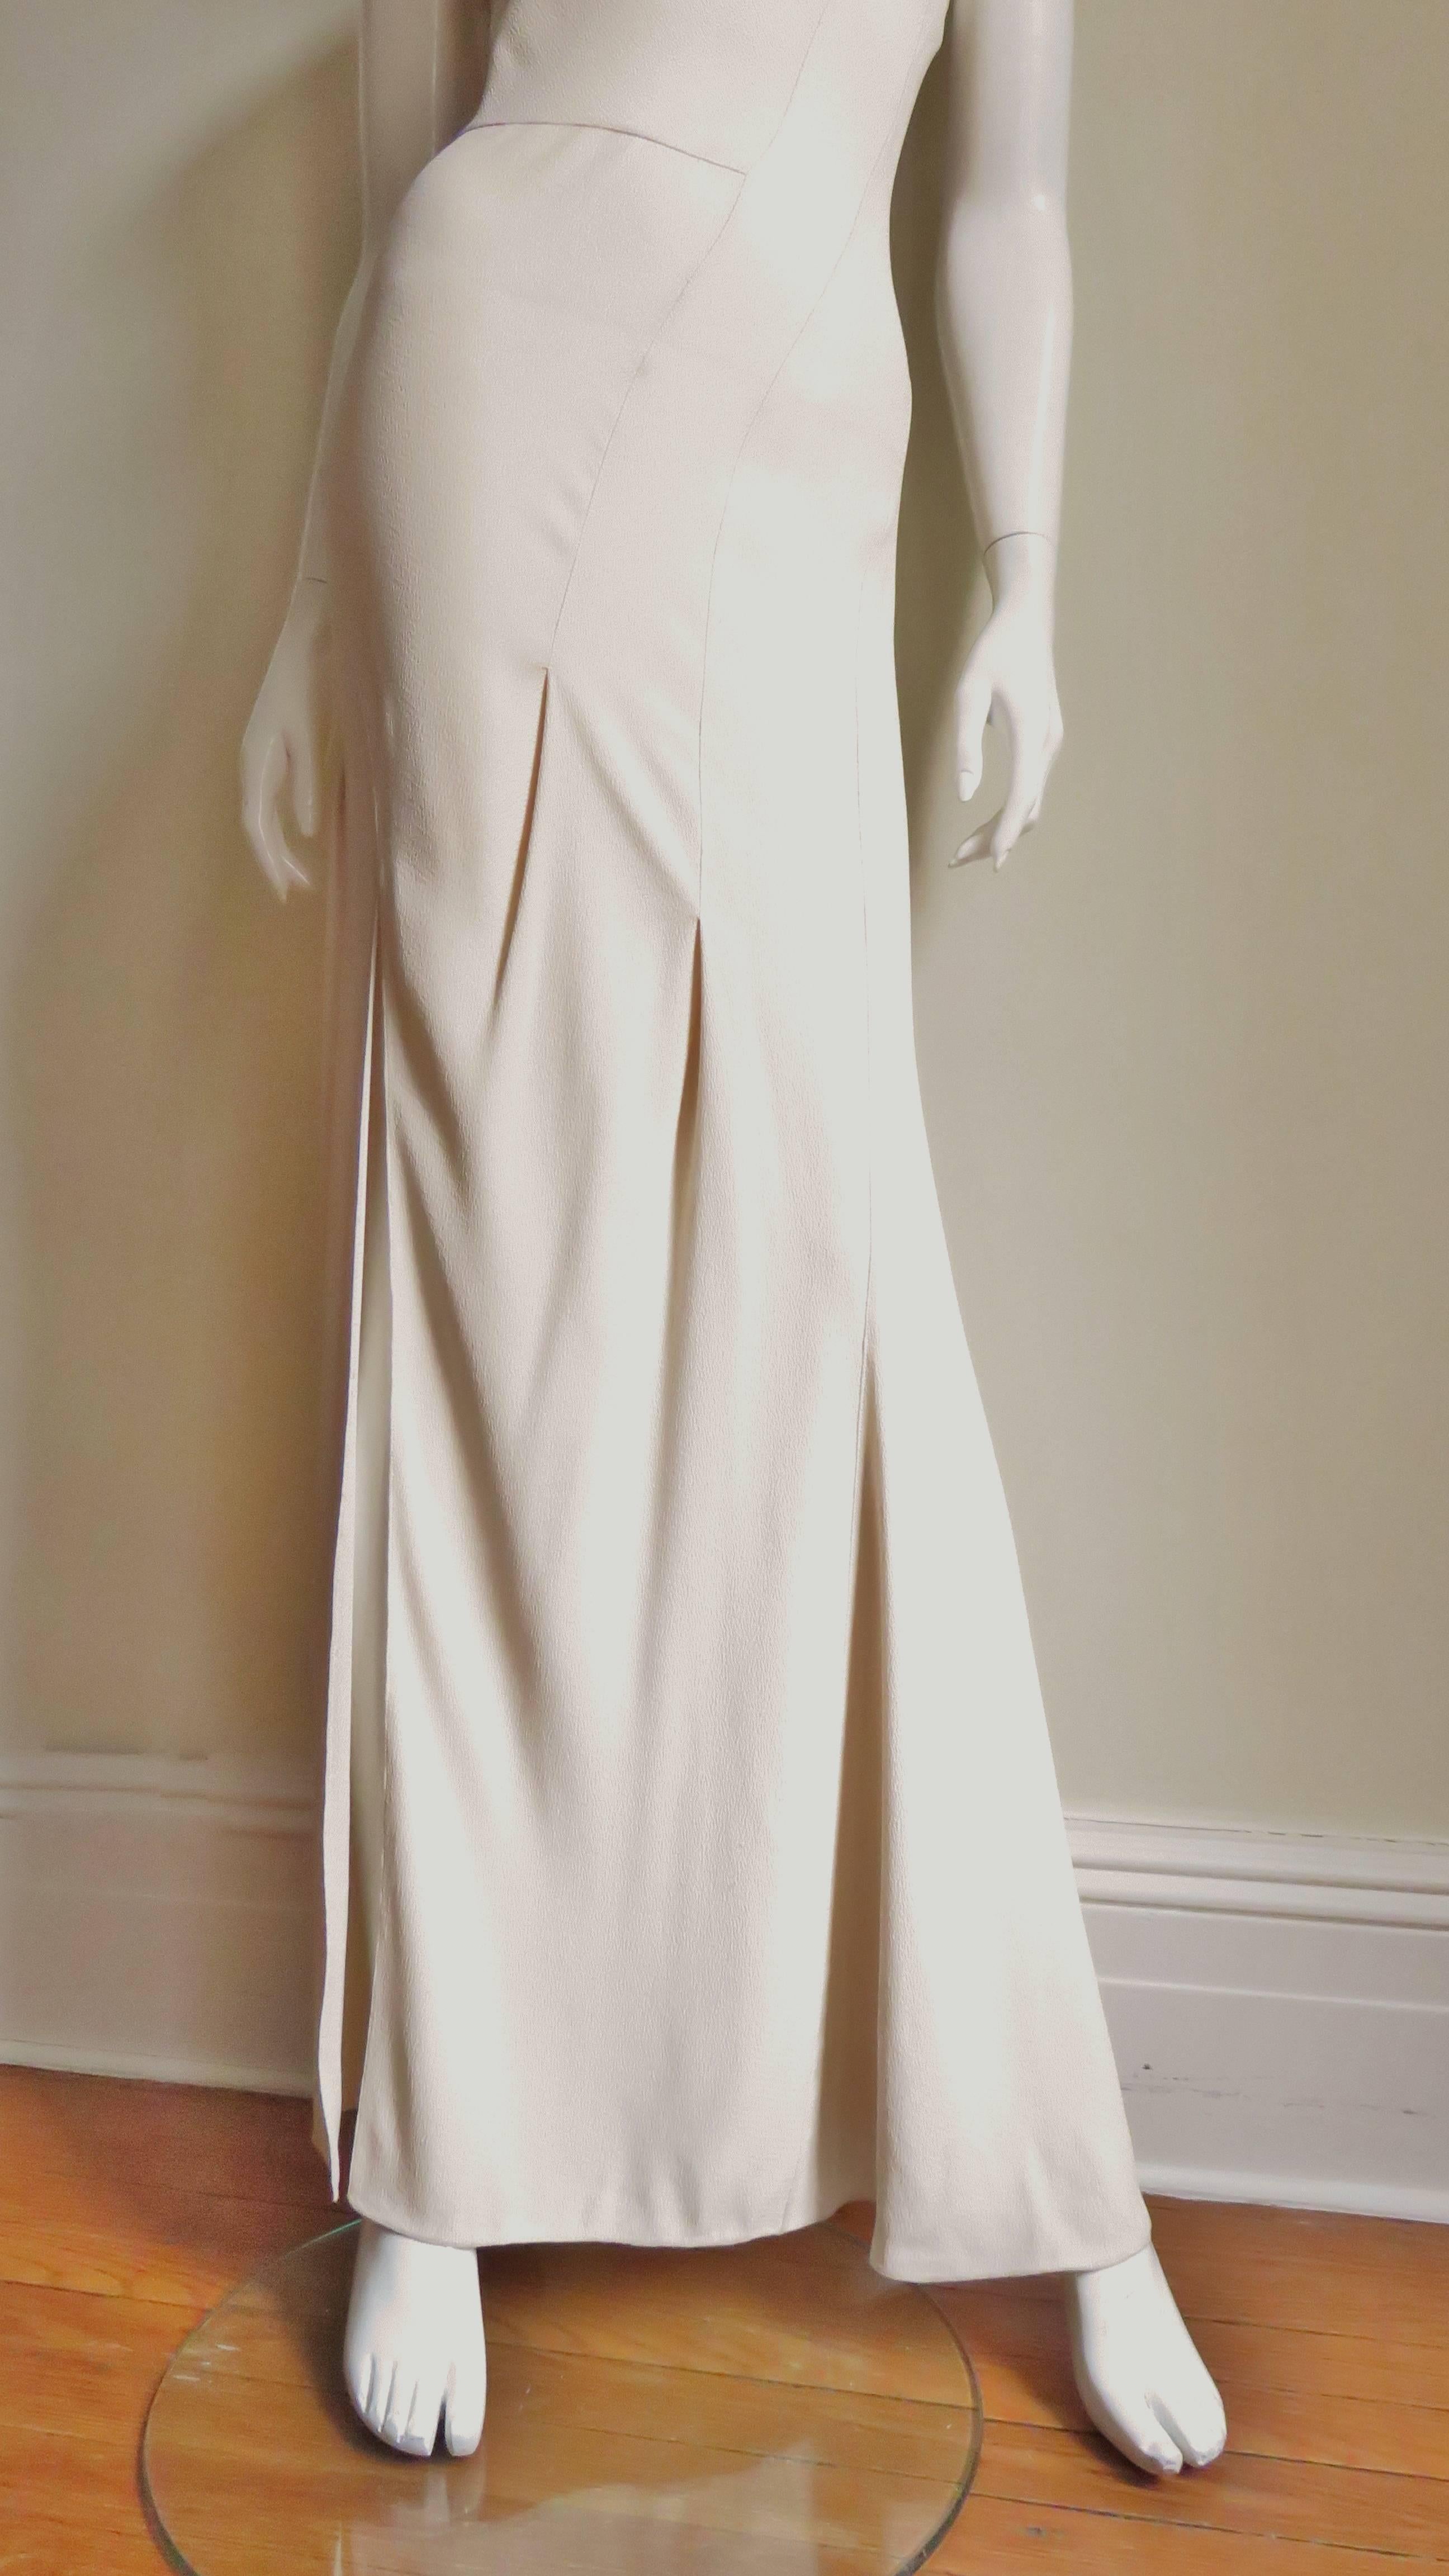 John Galliano for Christian Dior Pale Pink Silk Seam Gown In Excellent Condition For Sale In Water Mill, NY